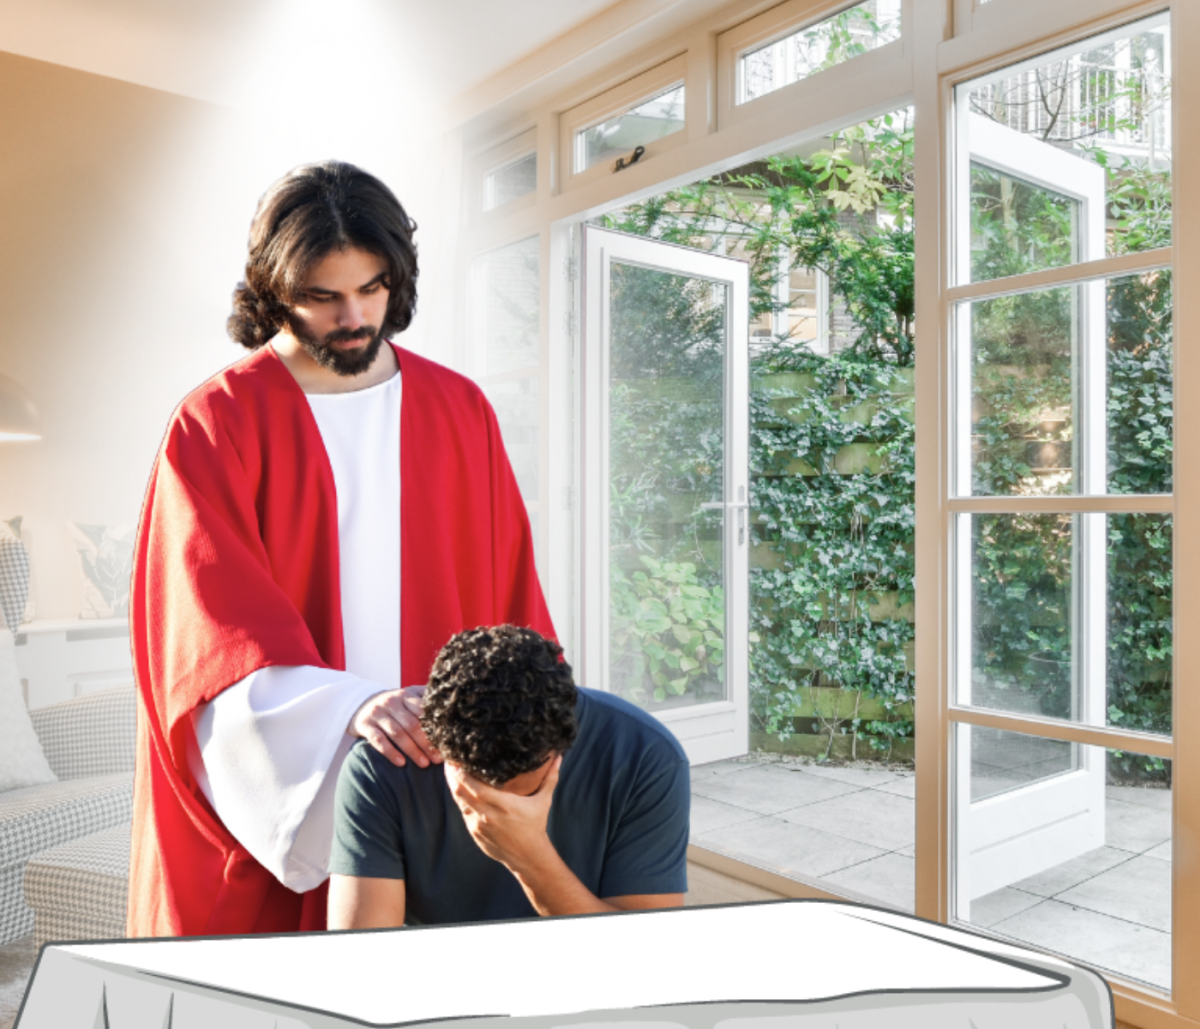 5 Powerful Signs That Jesus Is Present in Your Home